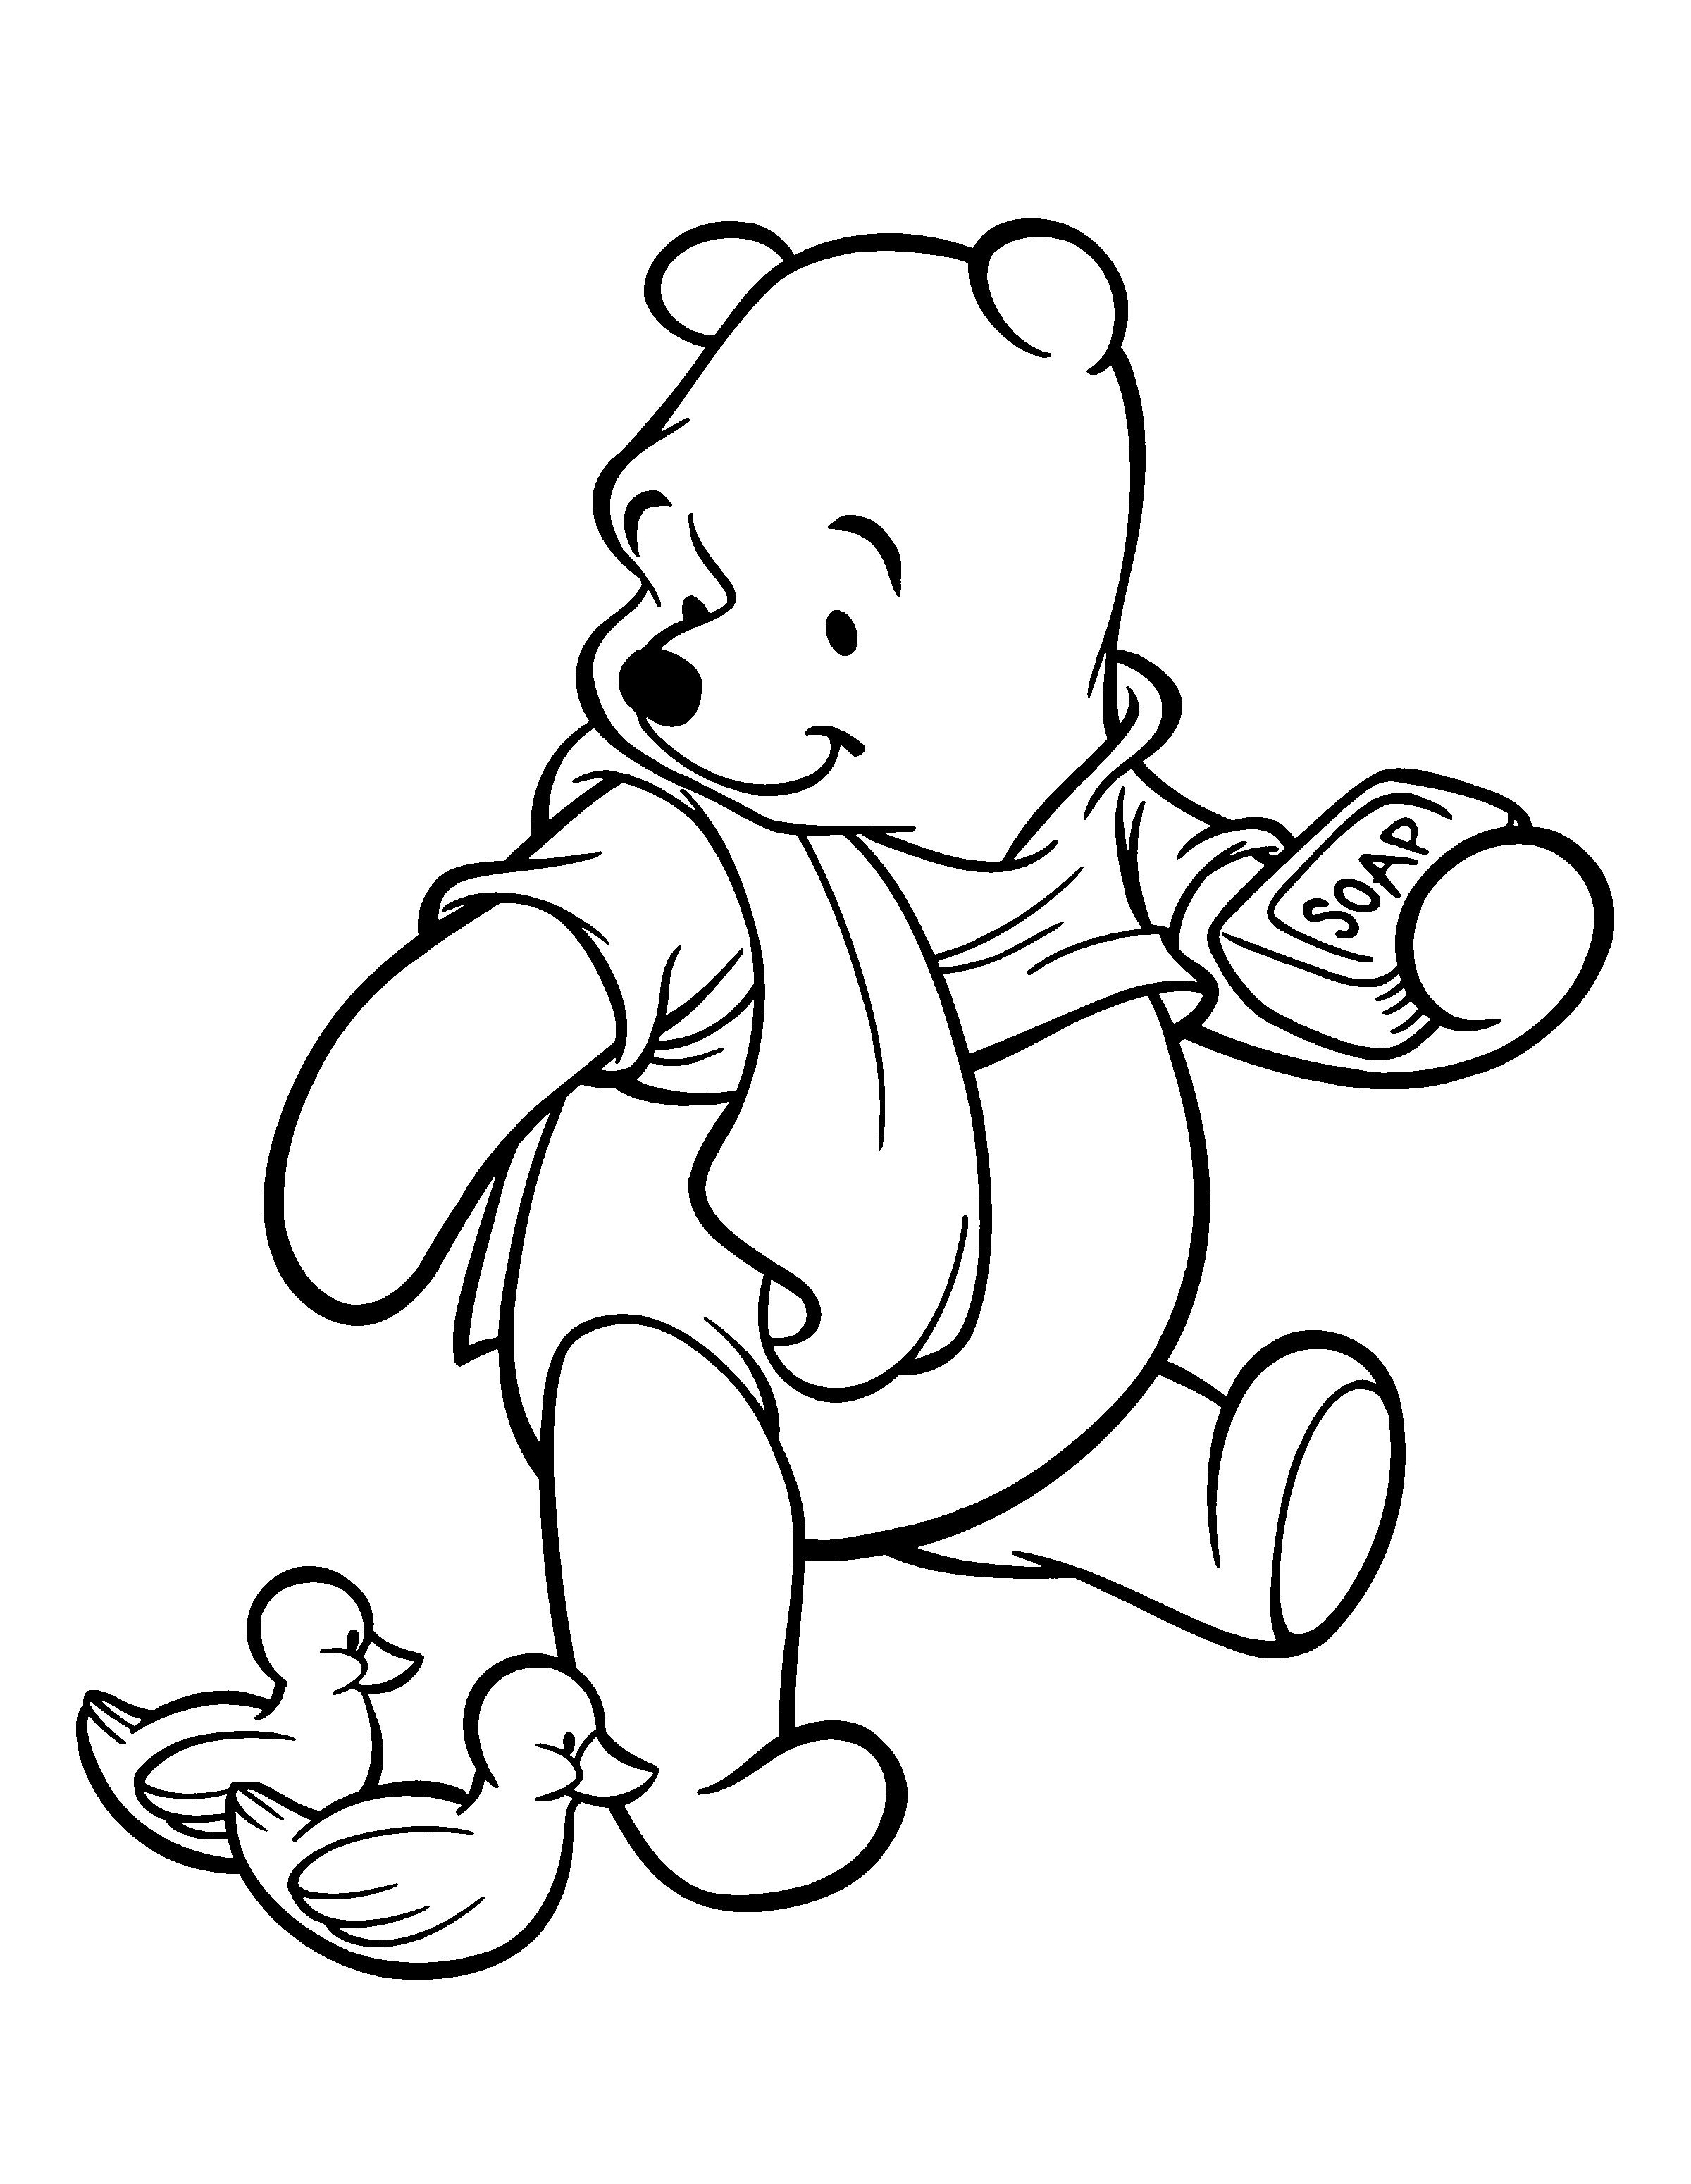 baby-winnie-the-pooh-drawing-at-getdrawings-free-download-pin-by-ann